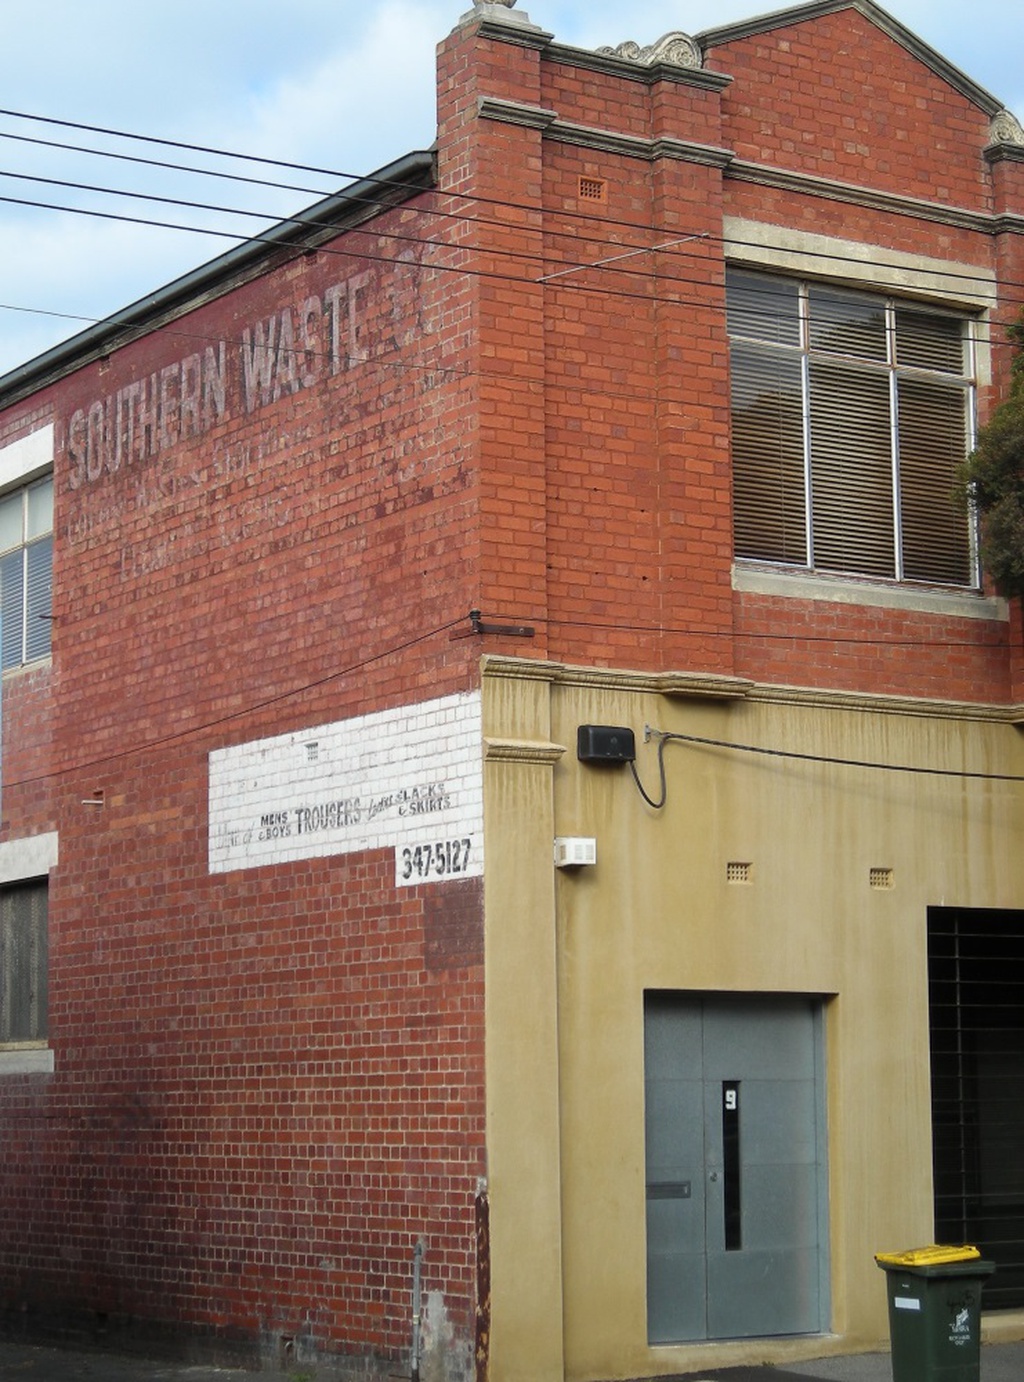 Advertising sign for Southern Waste Company, 9 Fenwick Street, North Carlton